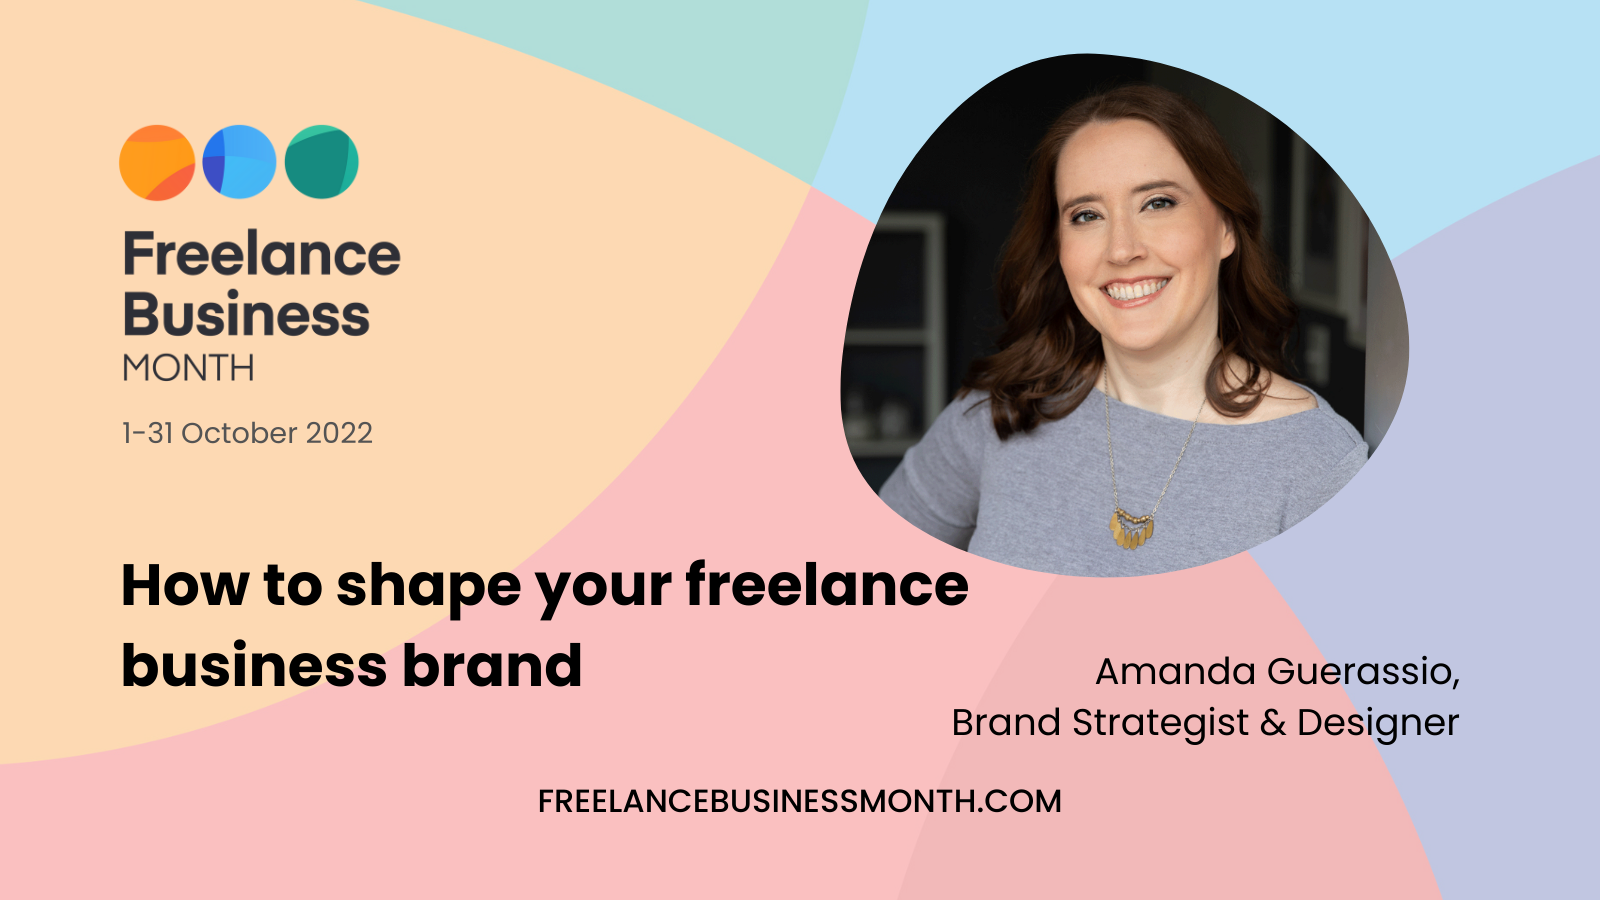  How to shape your freelance business brand with Amanda Guerassio, Brand Strategist &amp; Designer 